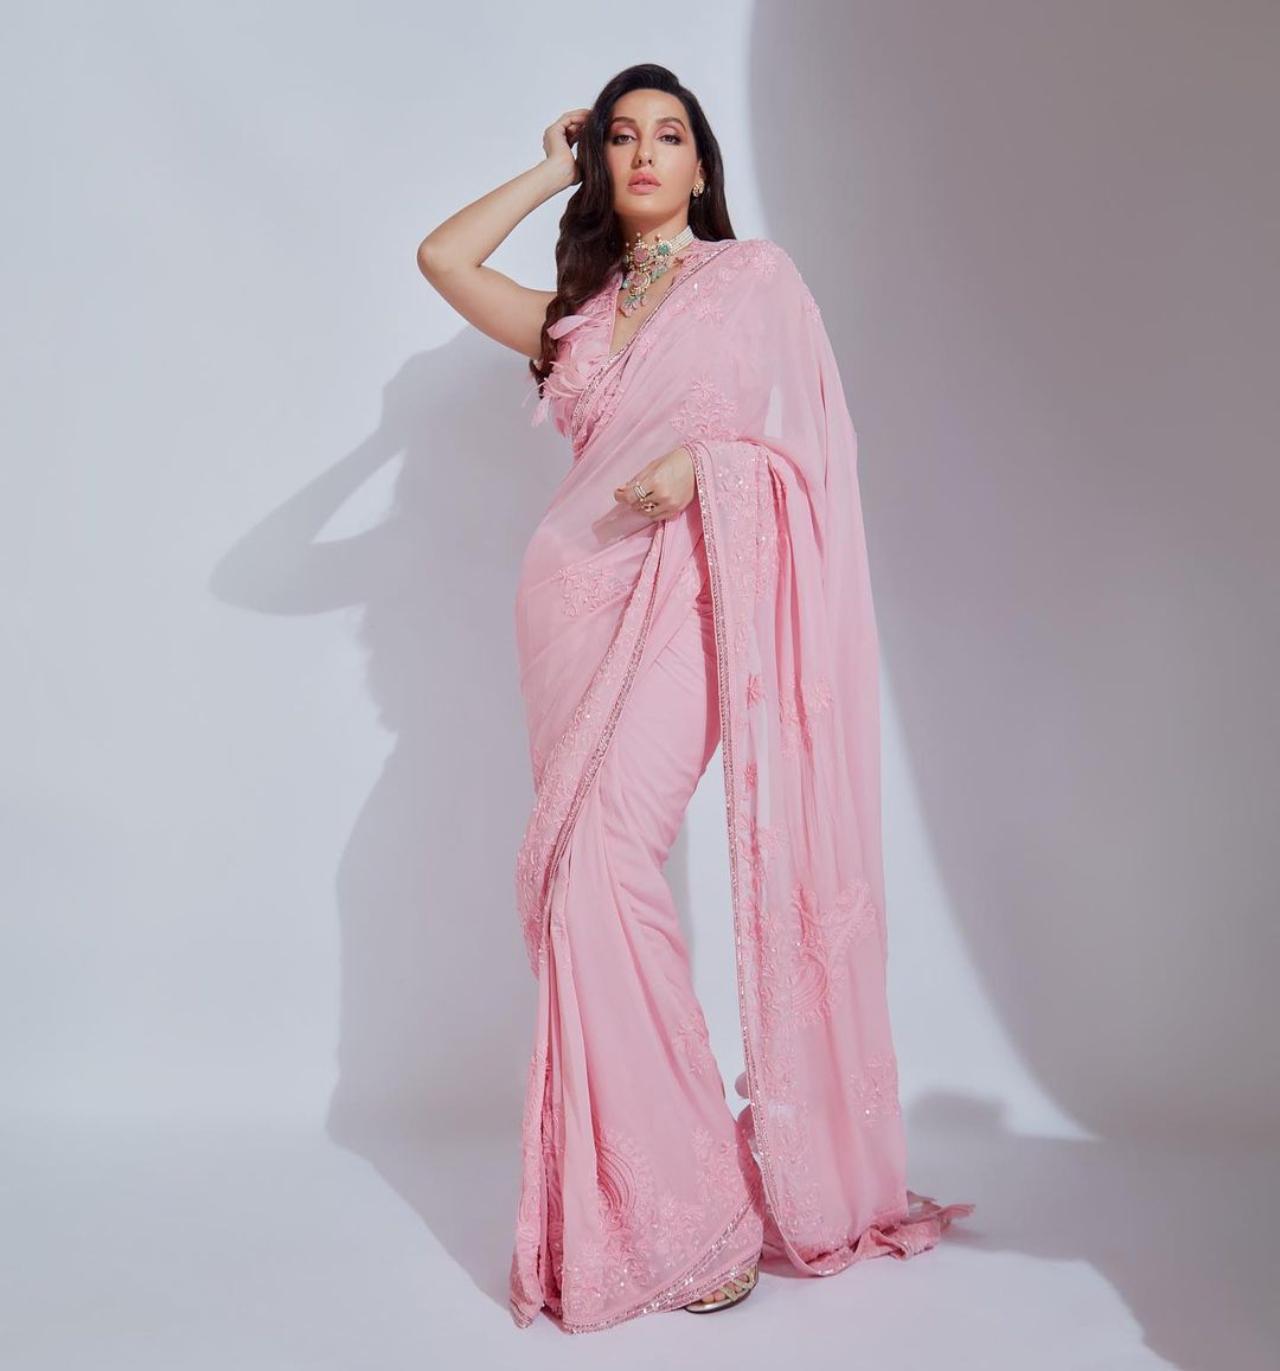 Nora looked dreamy in this baby pink coloured saree with feather design on the blouse. She completed the look with a choker necklace, shimmery make-up with pink eyeshadow